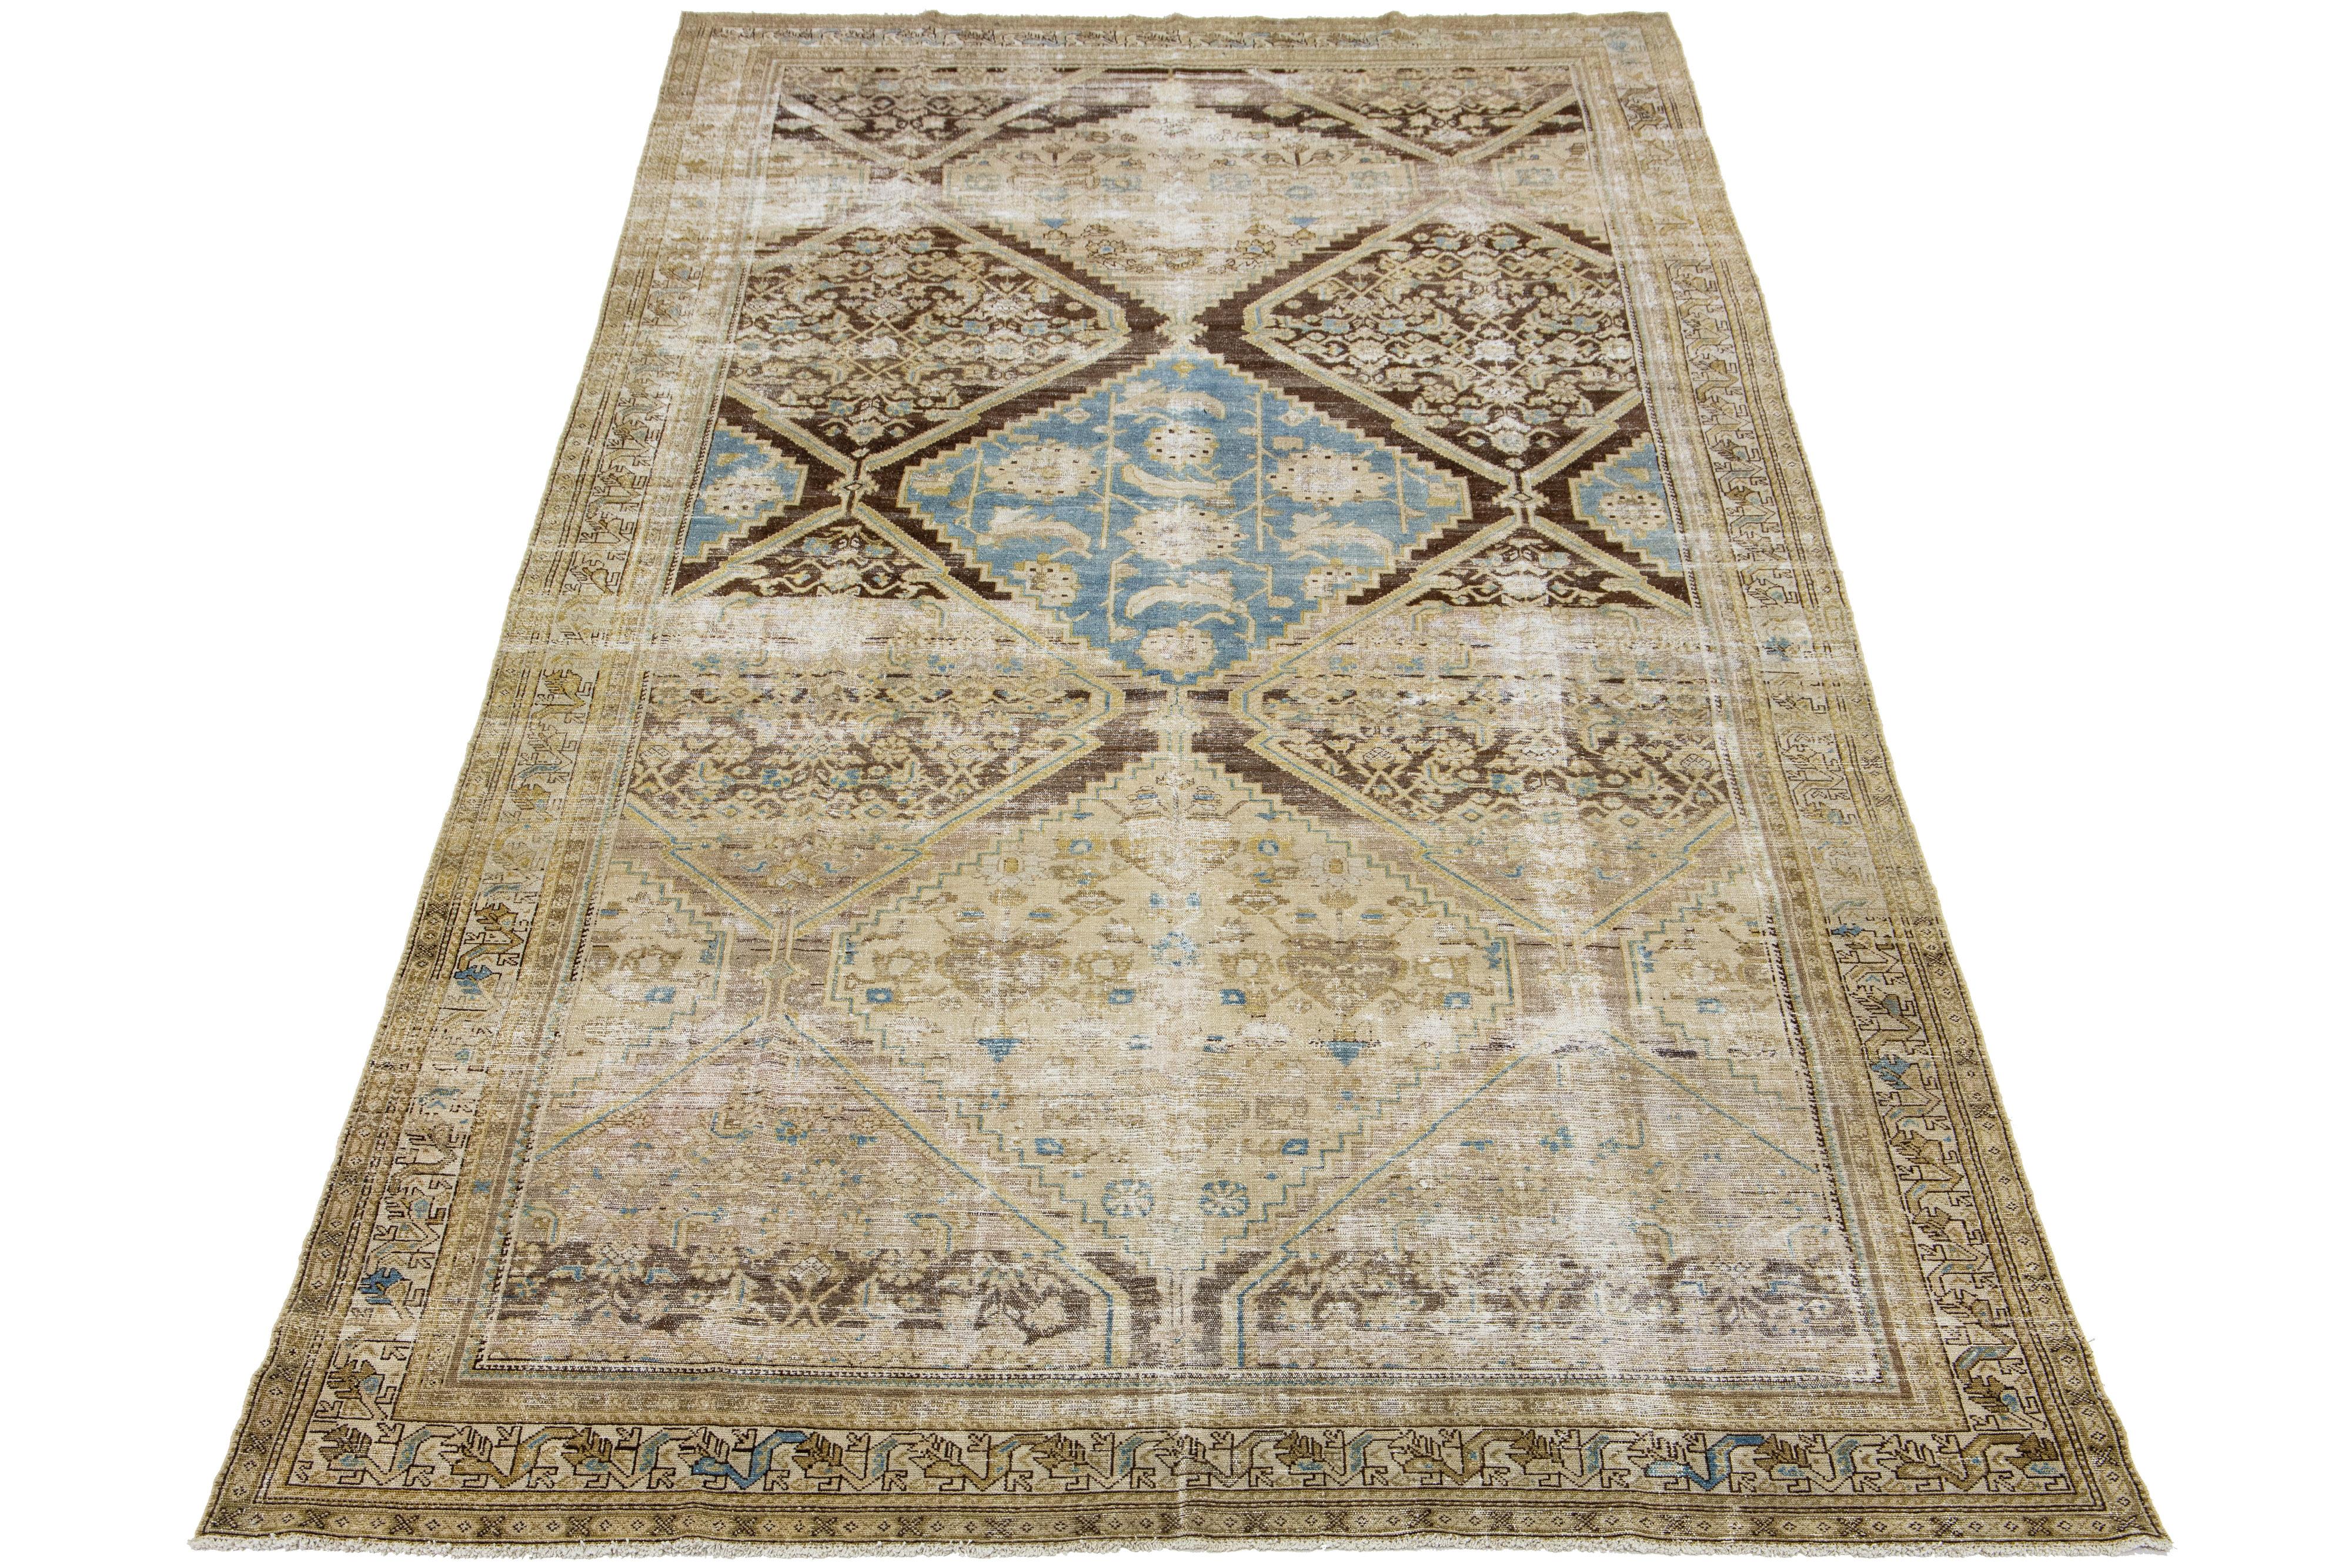 Hand-knotted wool antique Malayer rug featuring an all-over design with blue and beige accents on a brown color field.

This rug measures 7'9